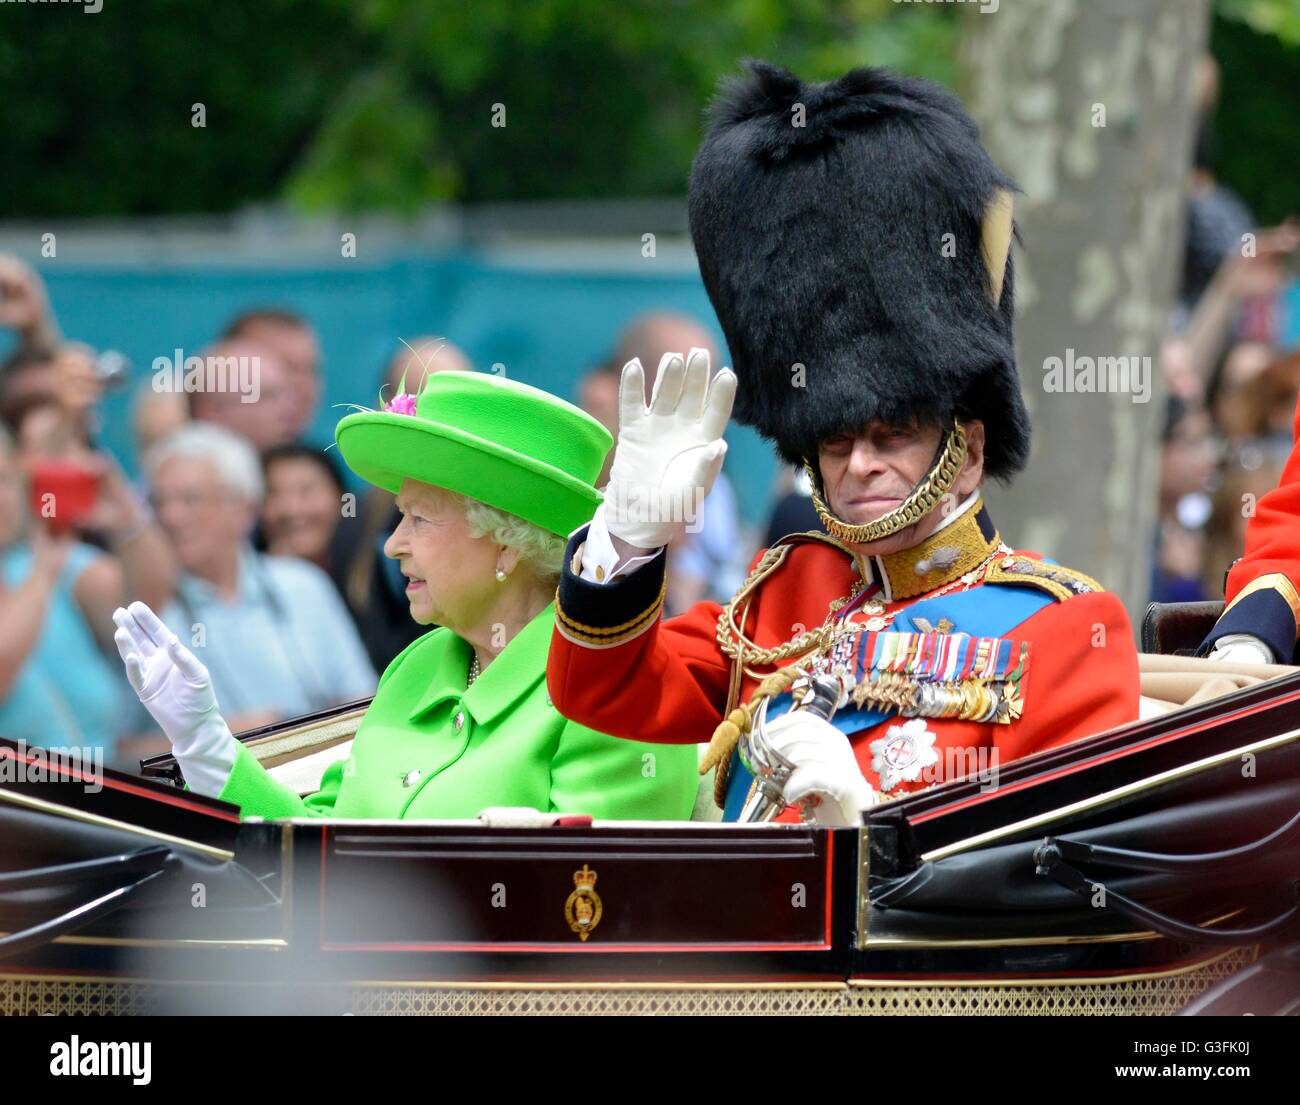 London, UK. 11th June, 2016. Trooping The Colour - The Queen's Birthday Parade. Queen Elizabeth II and Prince Philip Credit:  Dorset Media Service/Alamy Live News Stock Photo